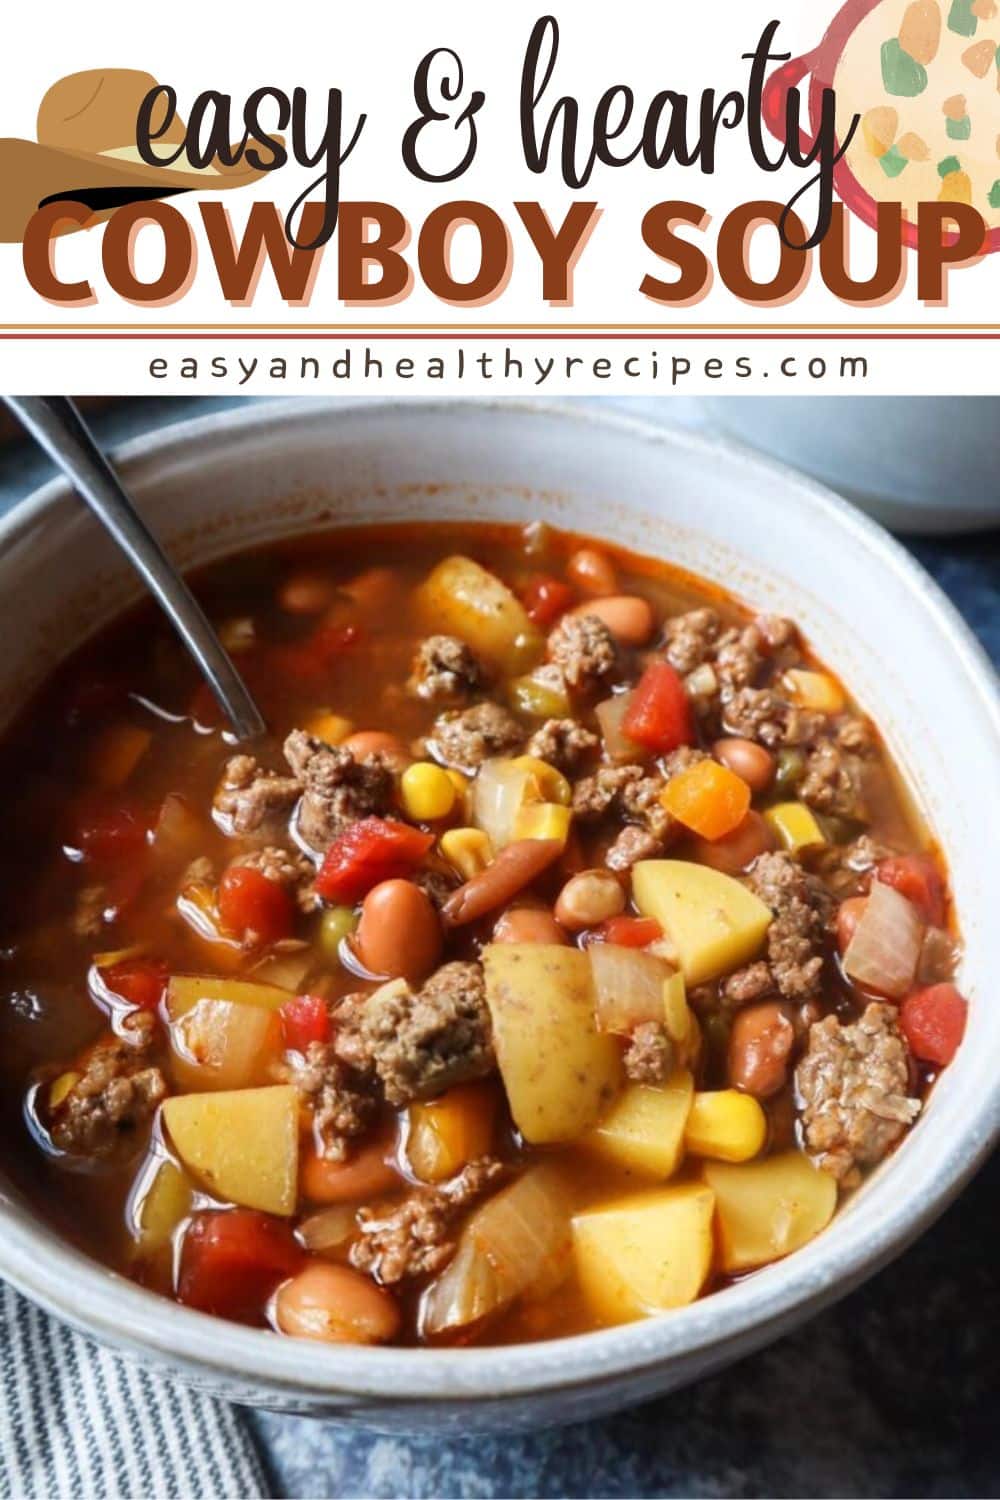 Easy And Hearty Cowboy Soup - Easy and Healthy Recipes